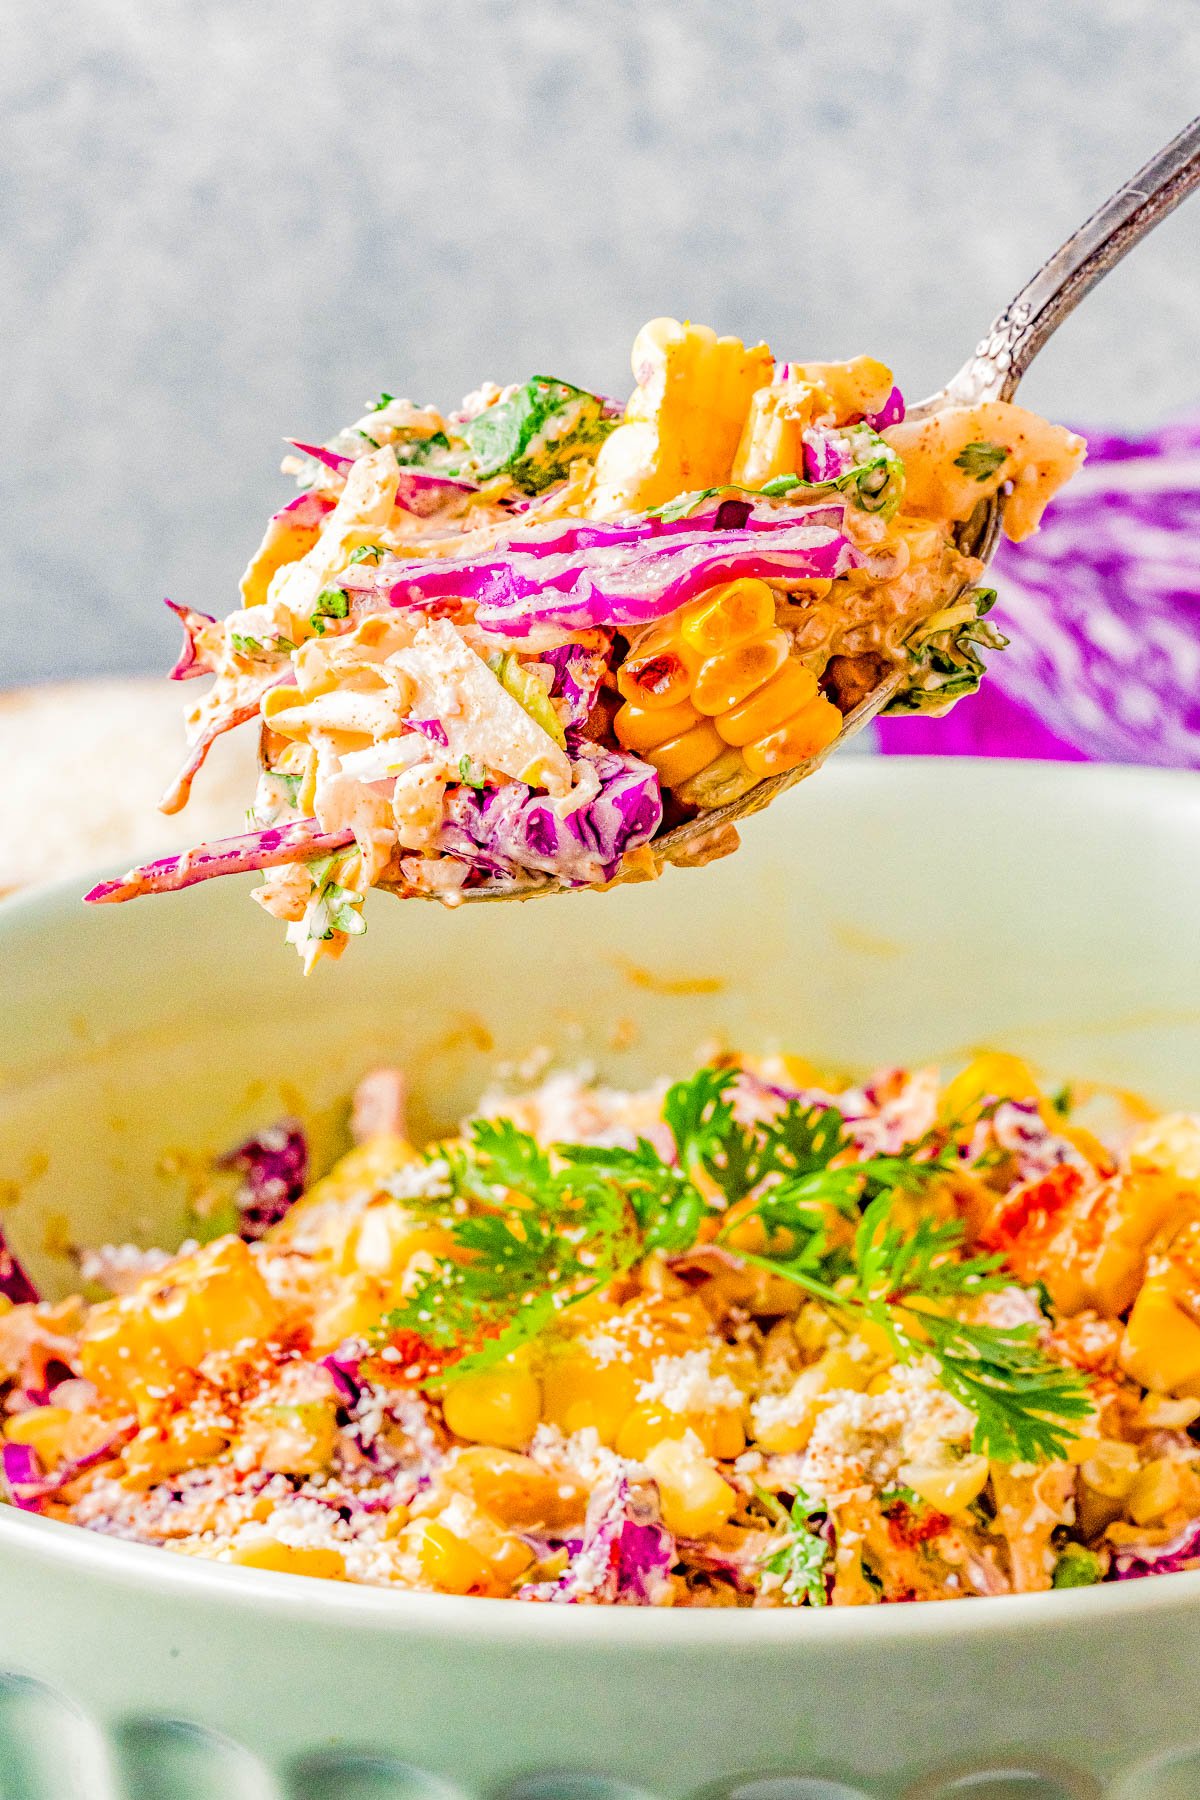 A fork lifting a colorful salad with corn, shredded purple cabbage, herbs, and grains from a bowl, with vibrant textures and fresh appearance.